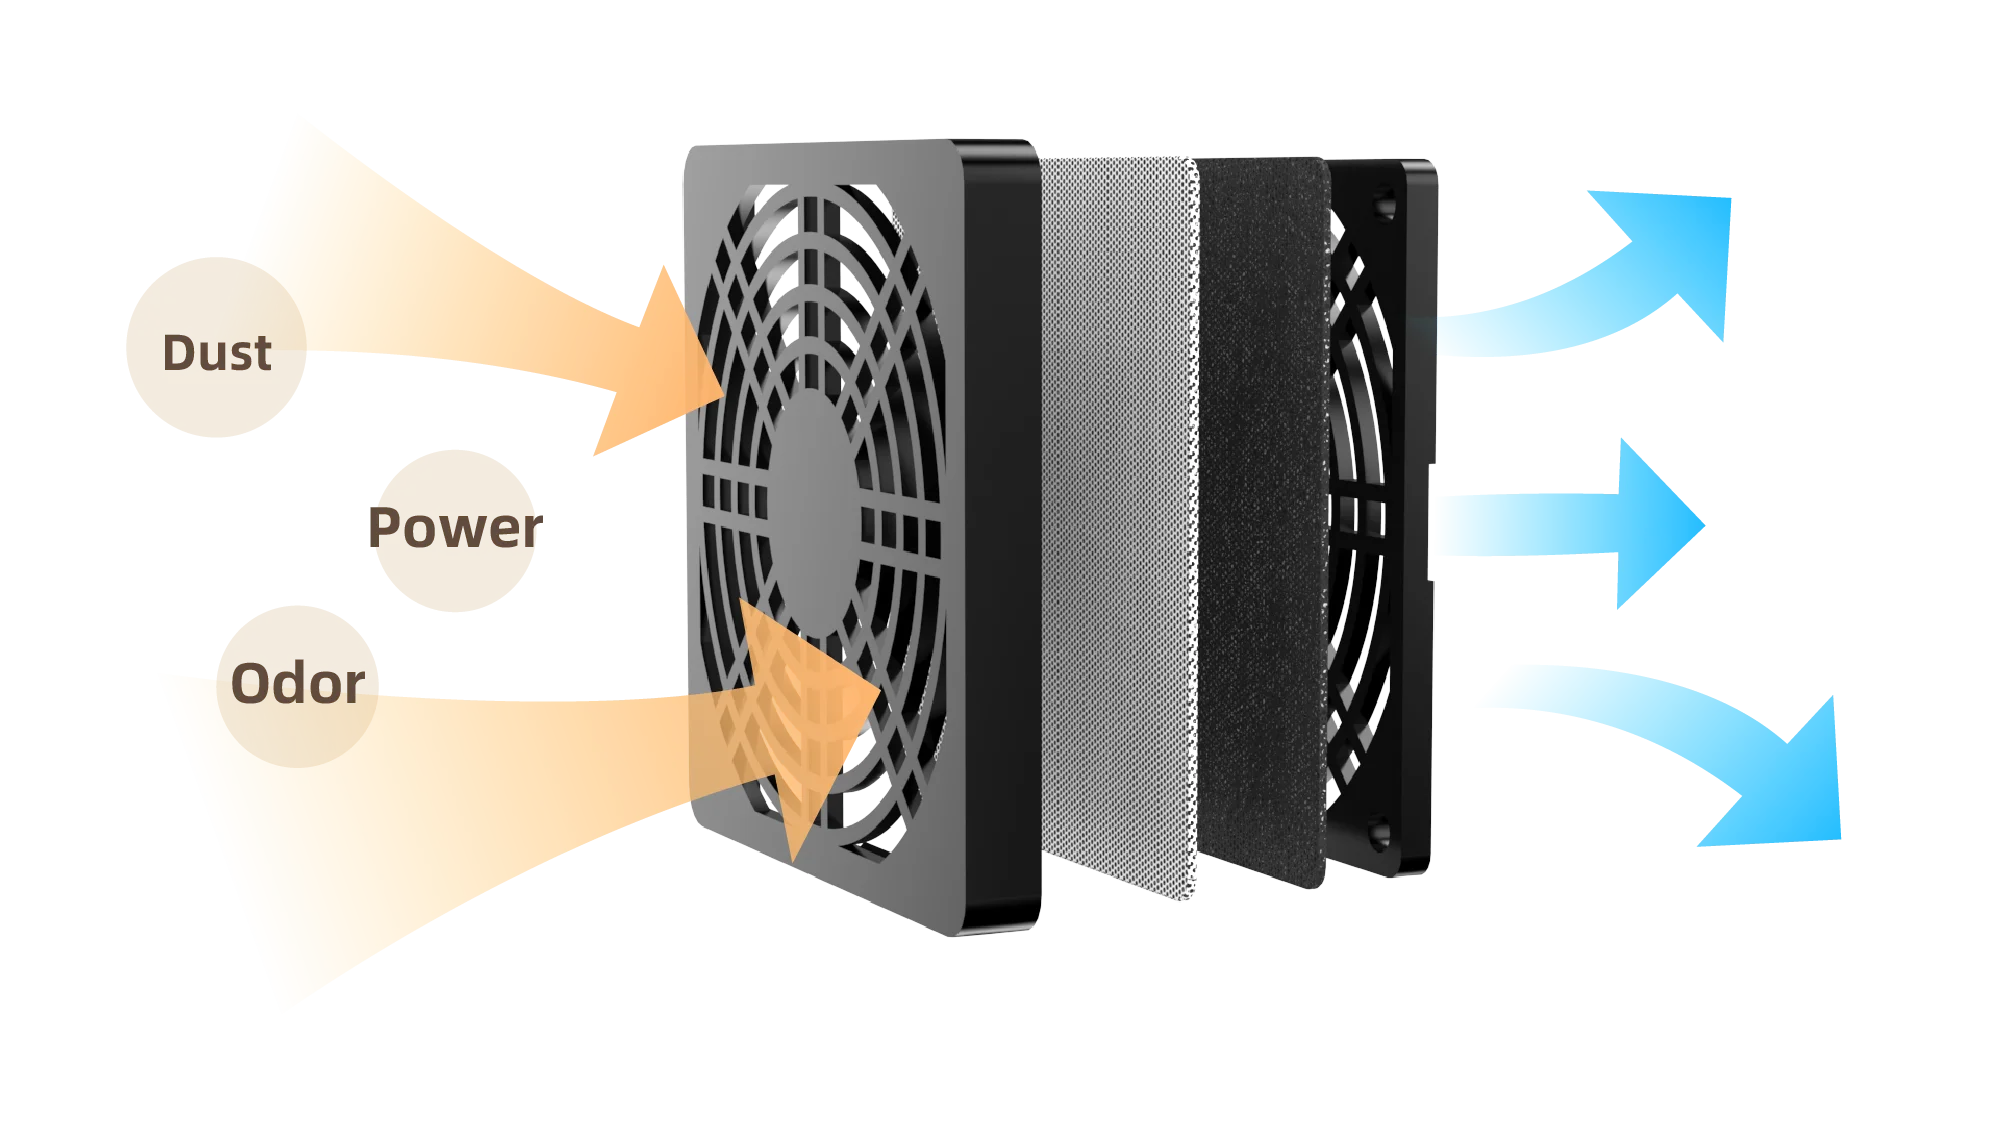 Creator 3 comes with 4 ventilating fans